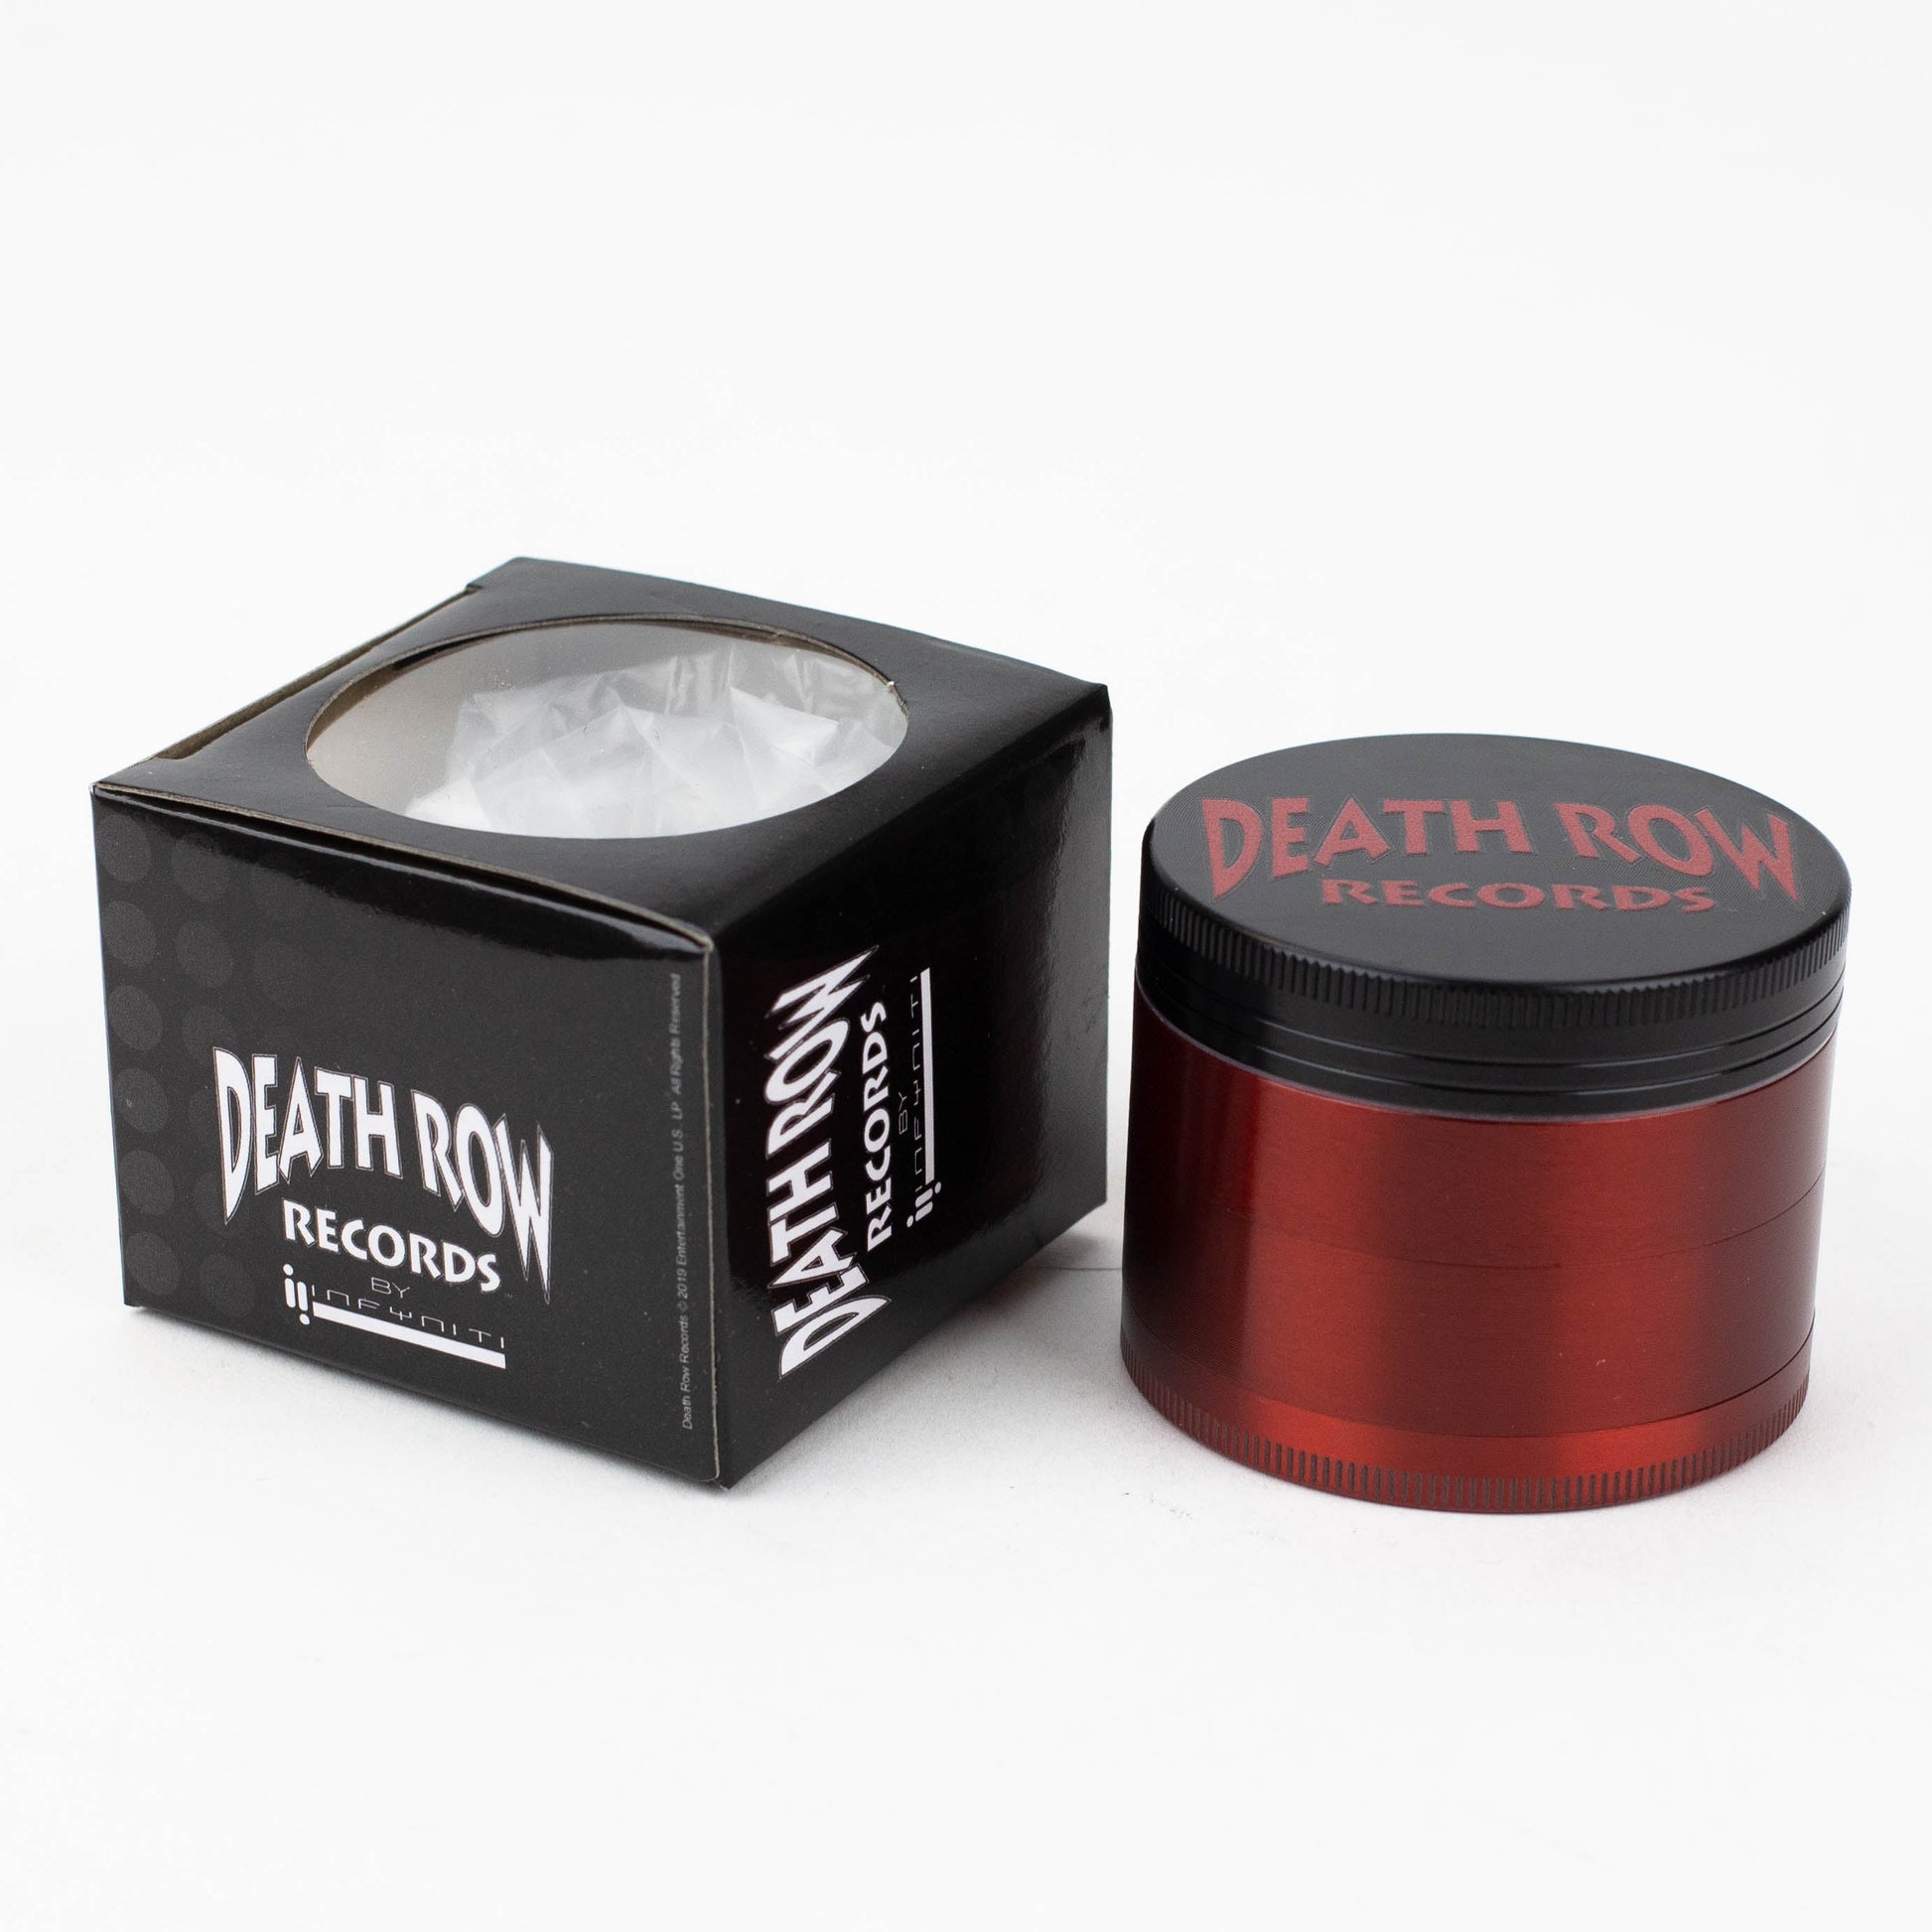 DEATH ROW - 4 parts metal red grinder by Infyniti_6